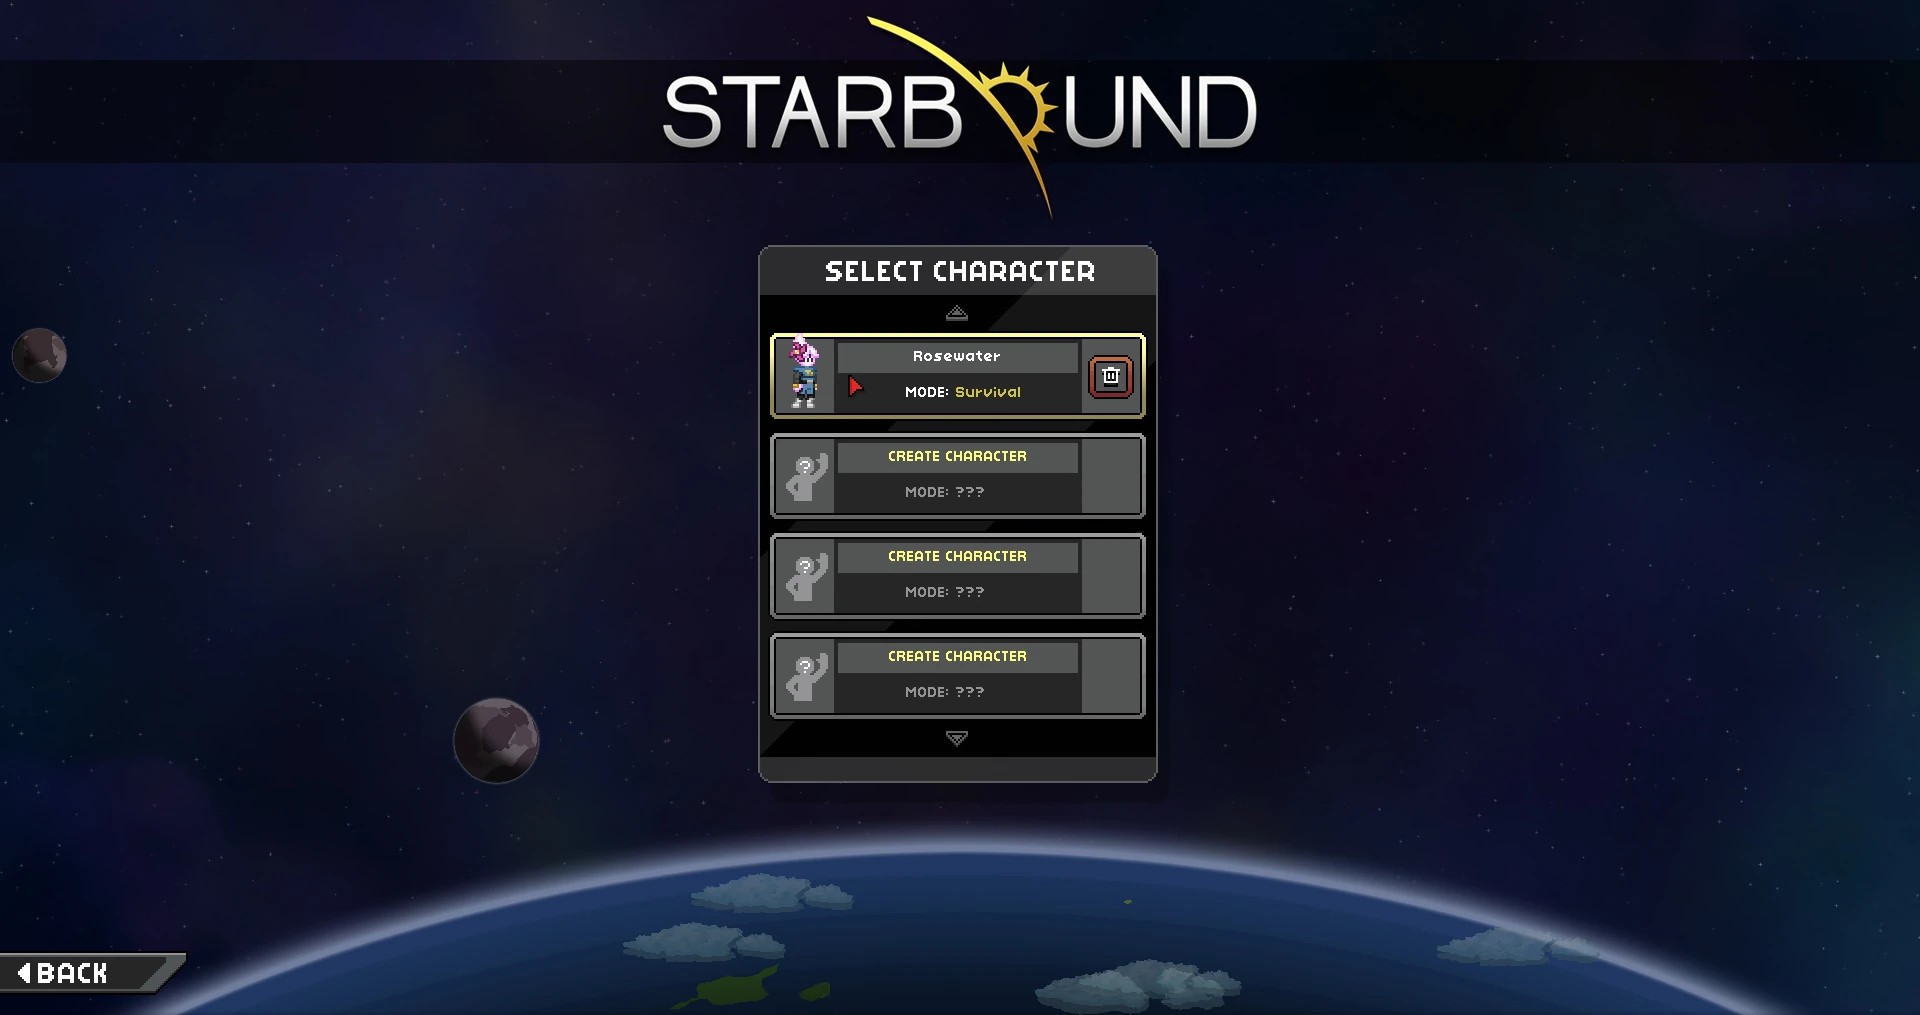 The Starbound character selection